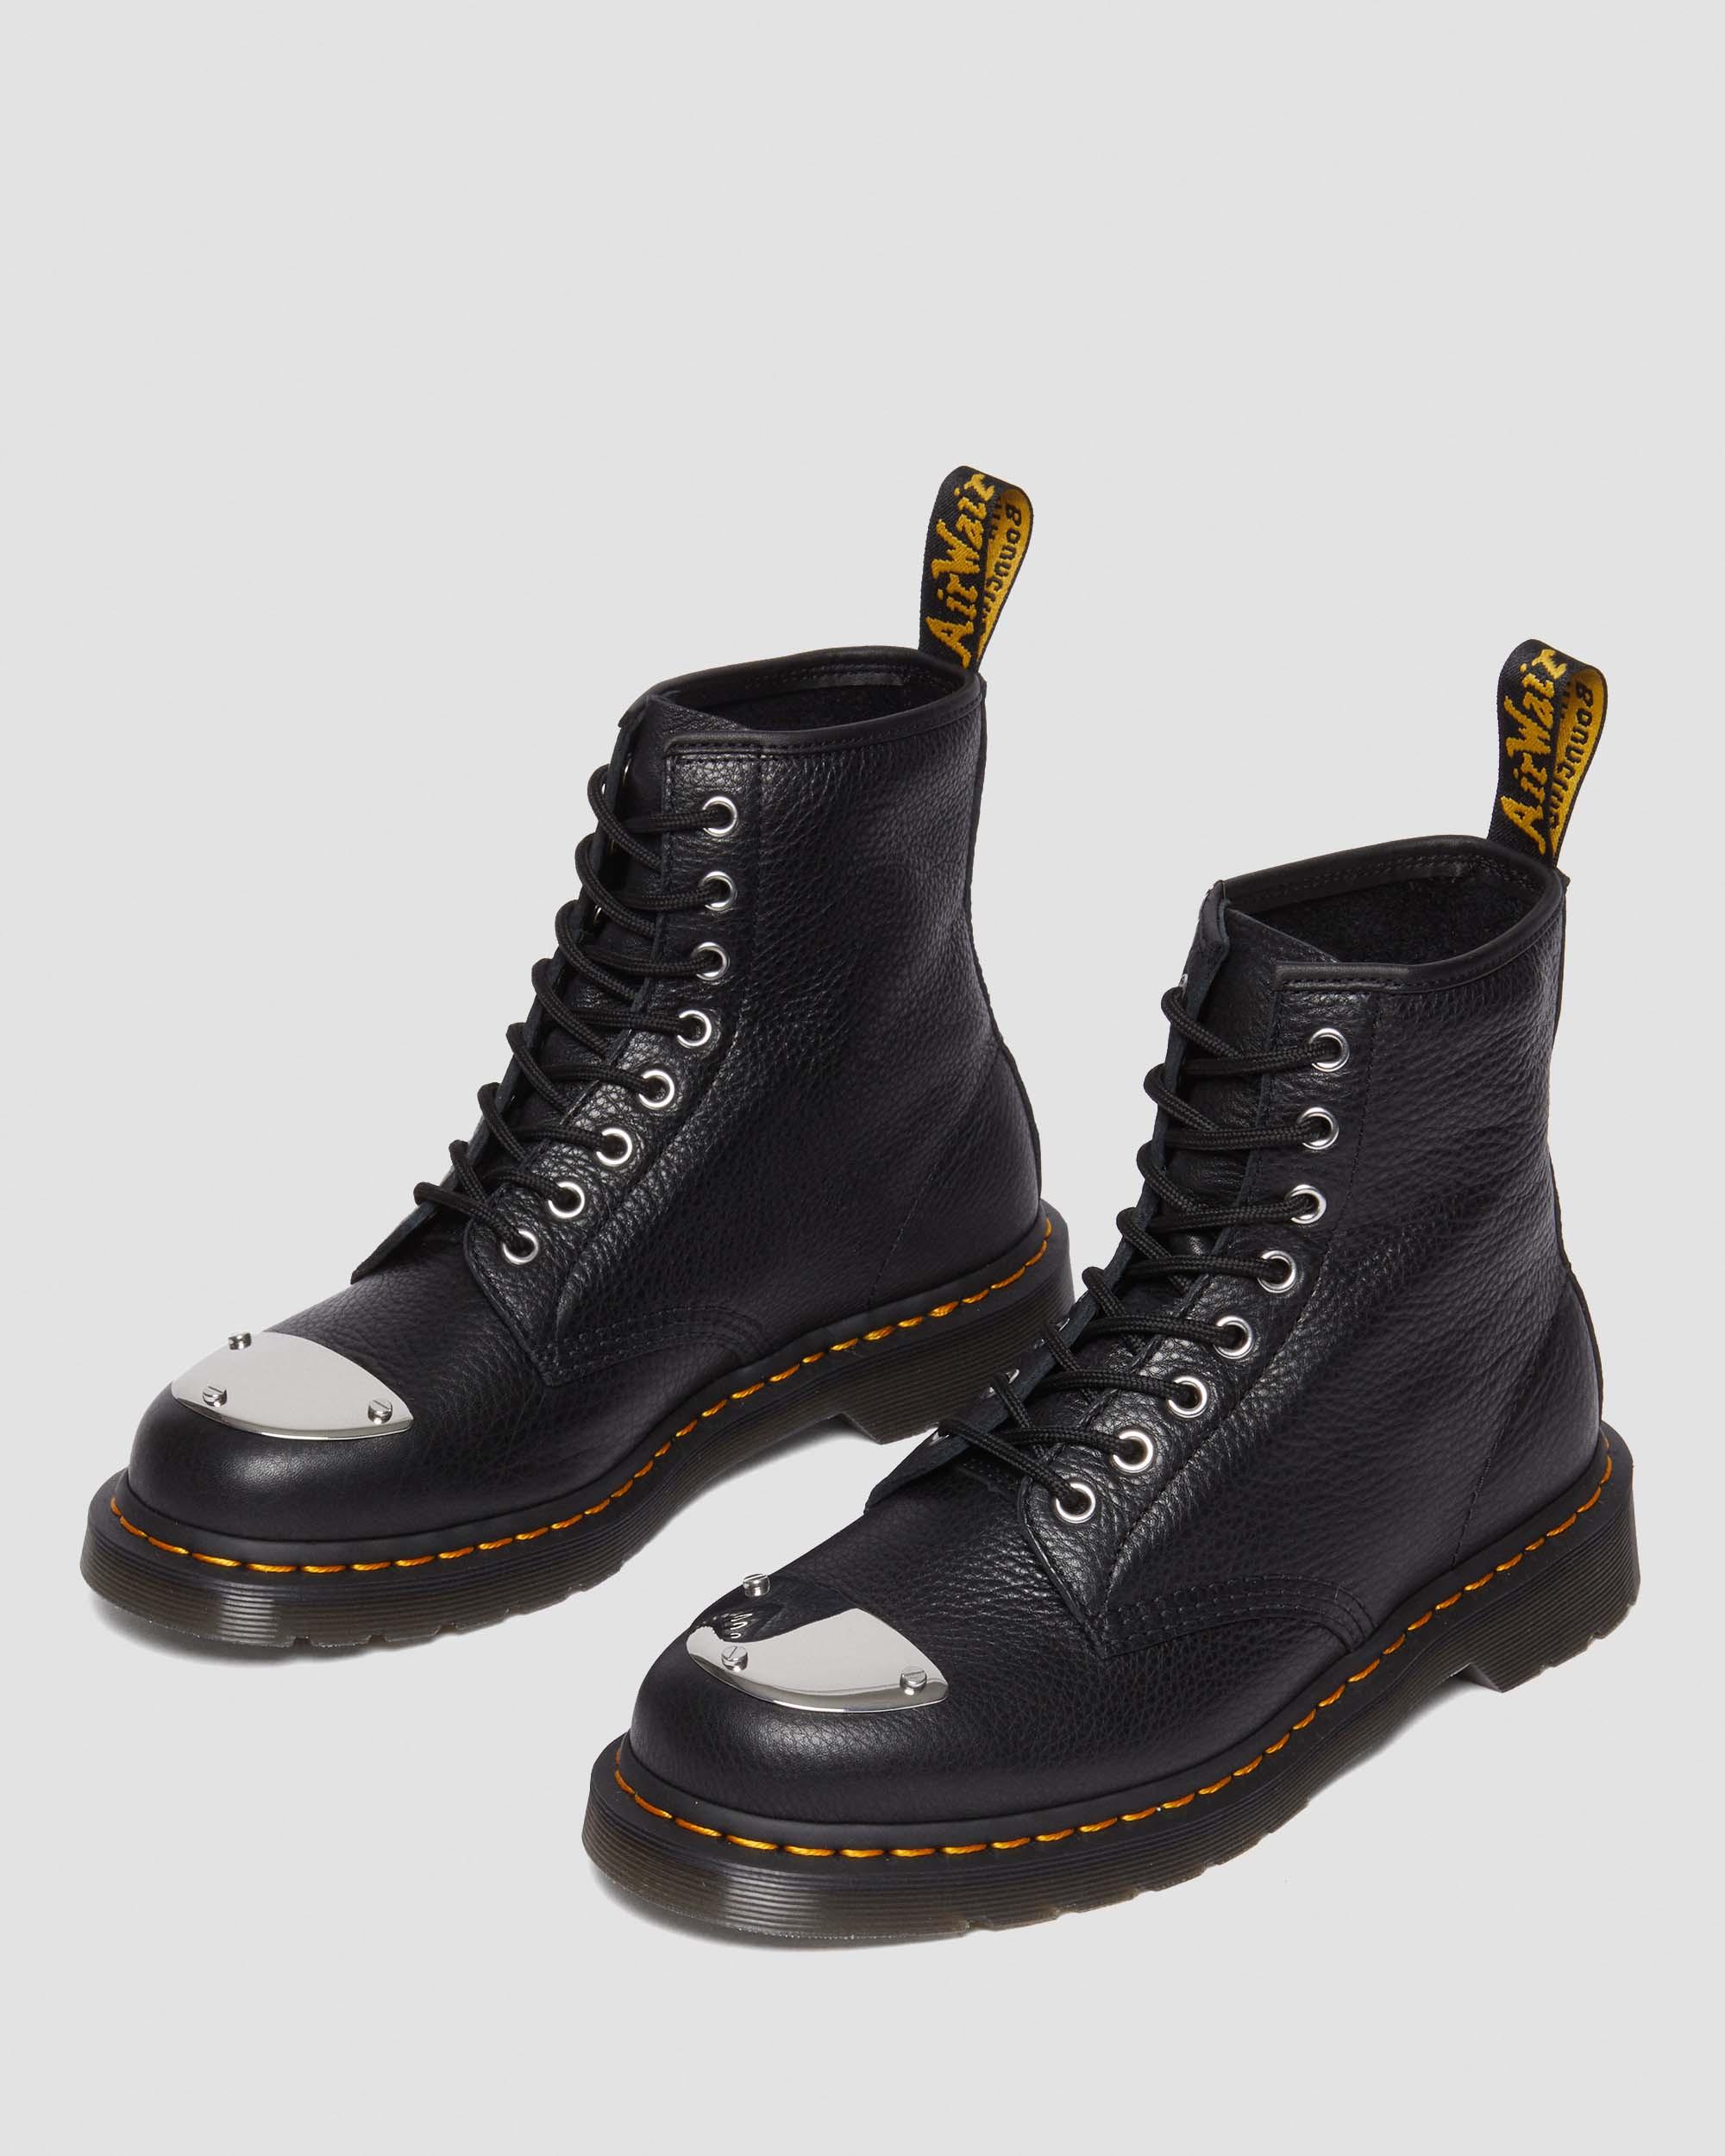 1460 Toe Plate Lunar Leather Jungle Zip Boots in Black